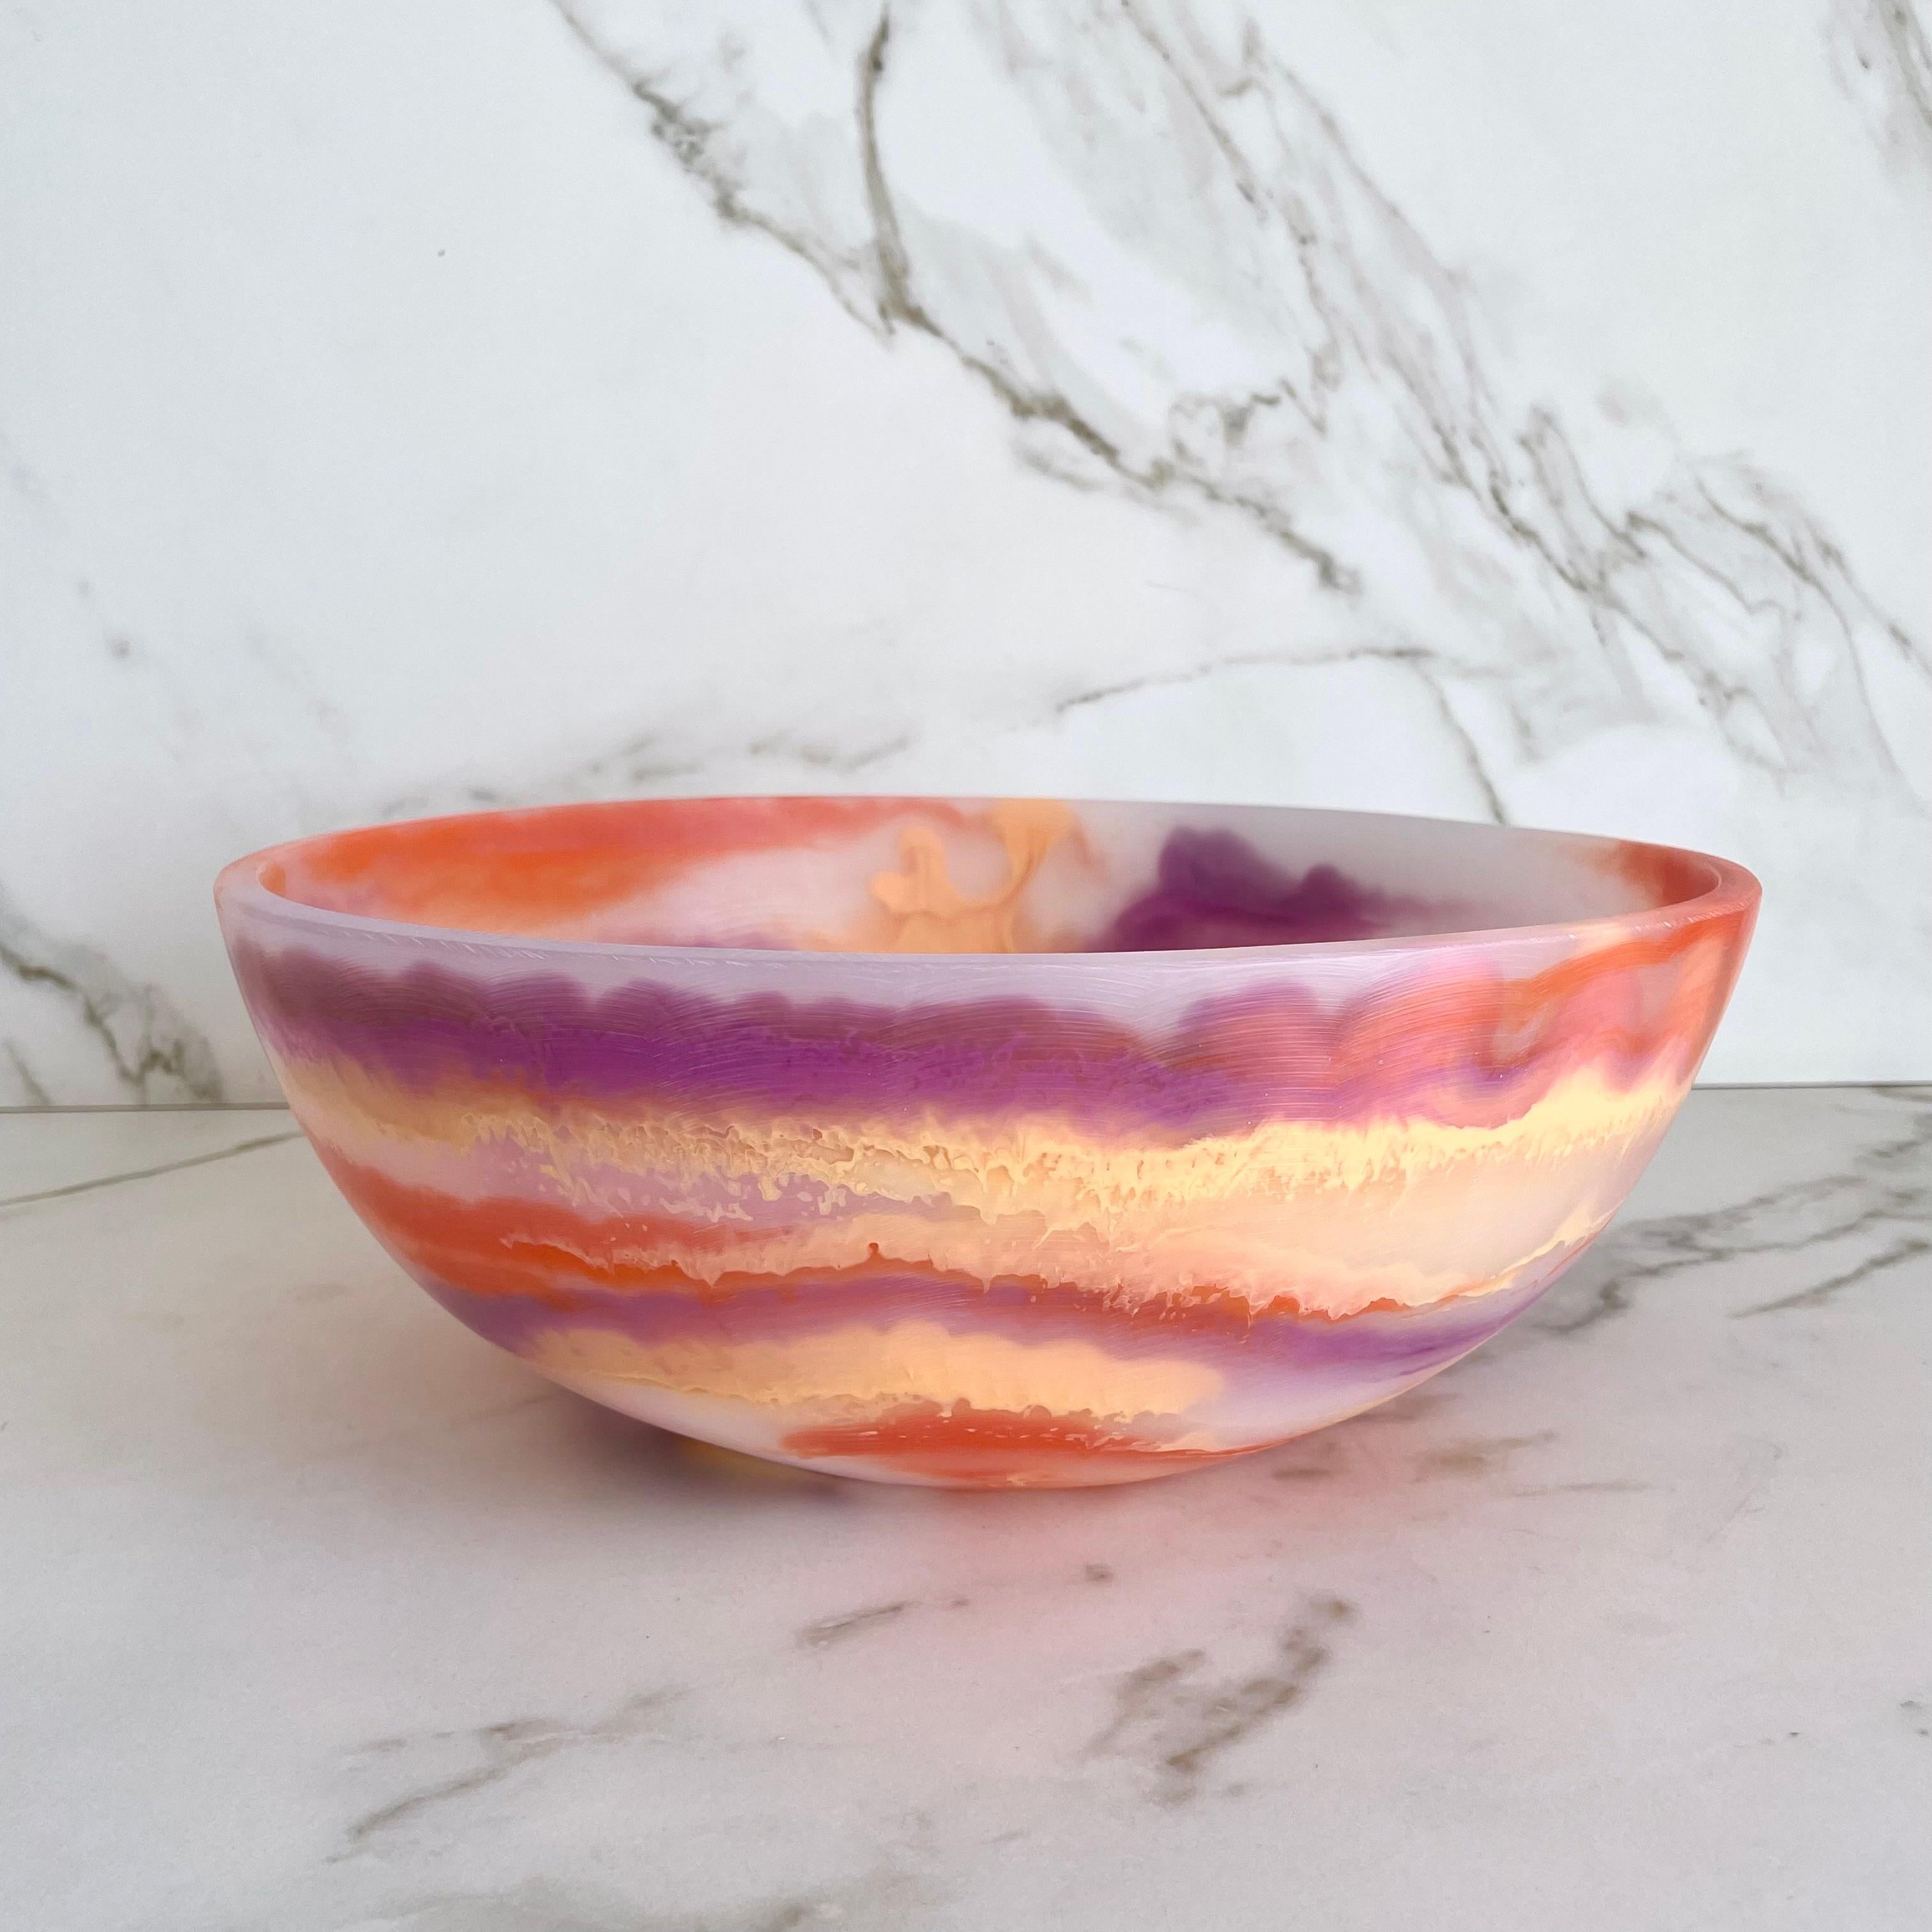 Our colorful bowl is handmade in traslucid white resin with marbled texture in purple, light orange and orange. Its fun and colorful design makes it a statement piece and can be used as decor,fruit platter or to serve cold food.

Designed by Paola